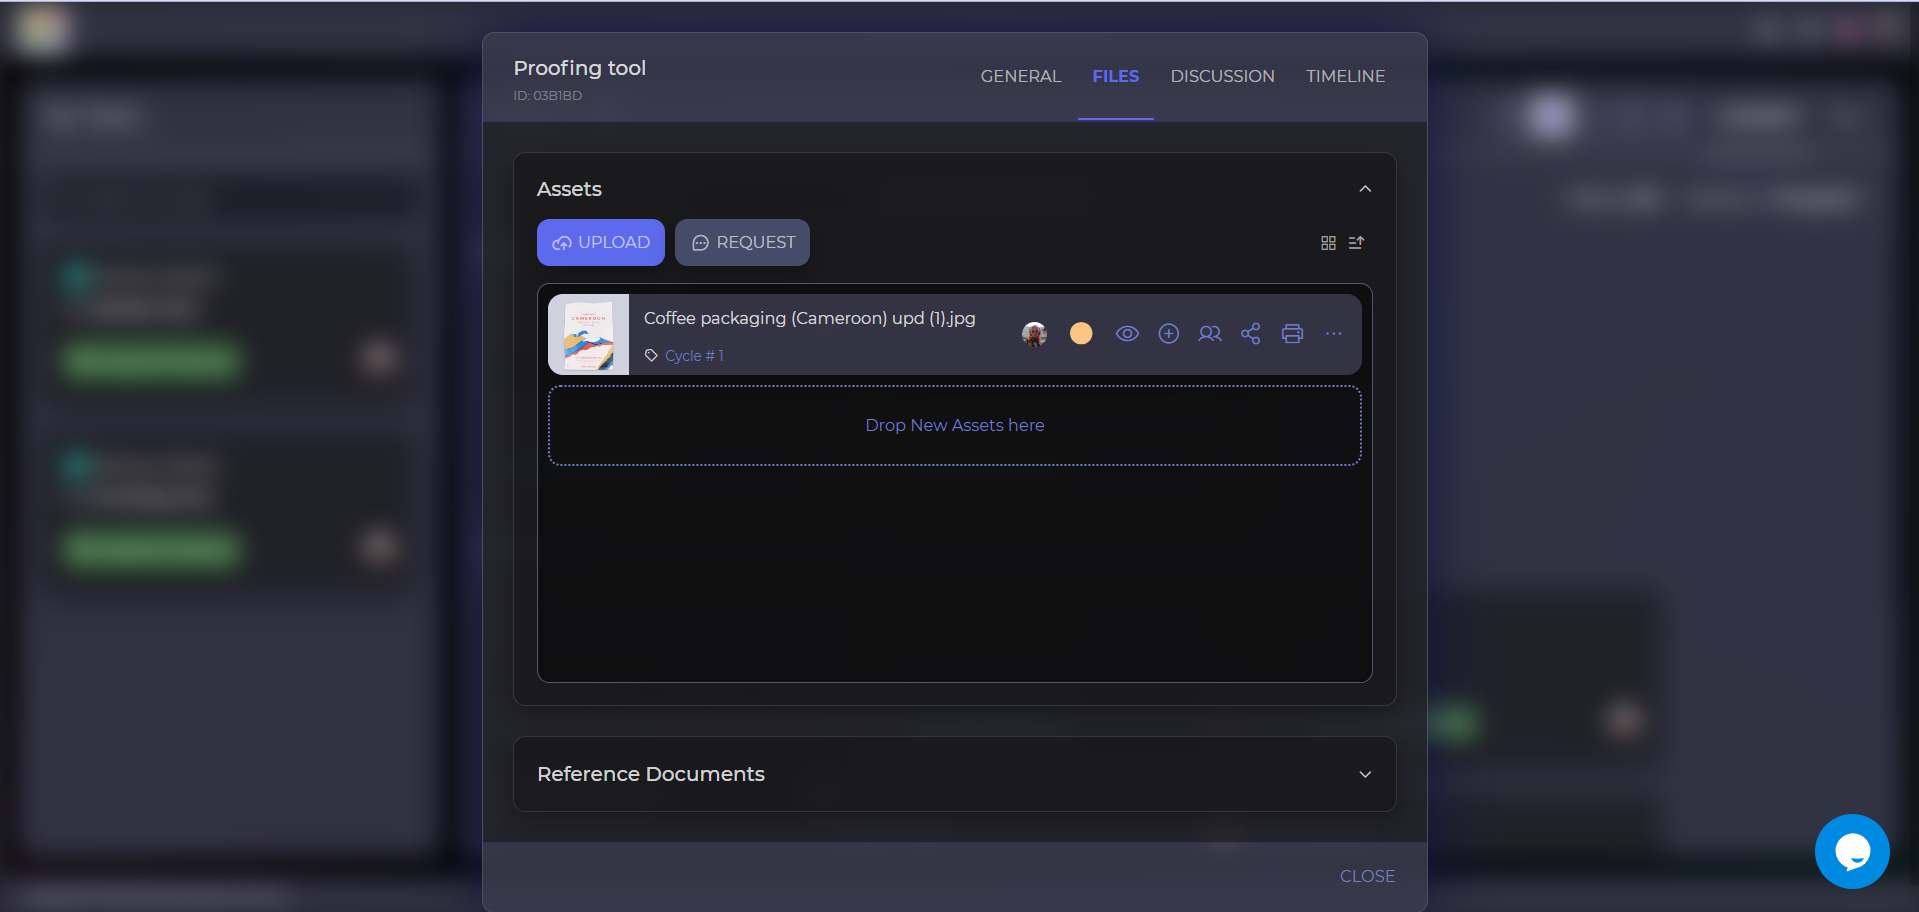 In a single screen, you can upload, view, and download assets. Assign review tasks to internal or external users, and track who uploaded asset versions. Personalize the tool and dashboard by adding your company logo, switching between light and dark mode.